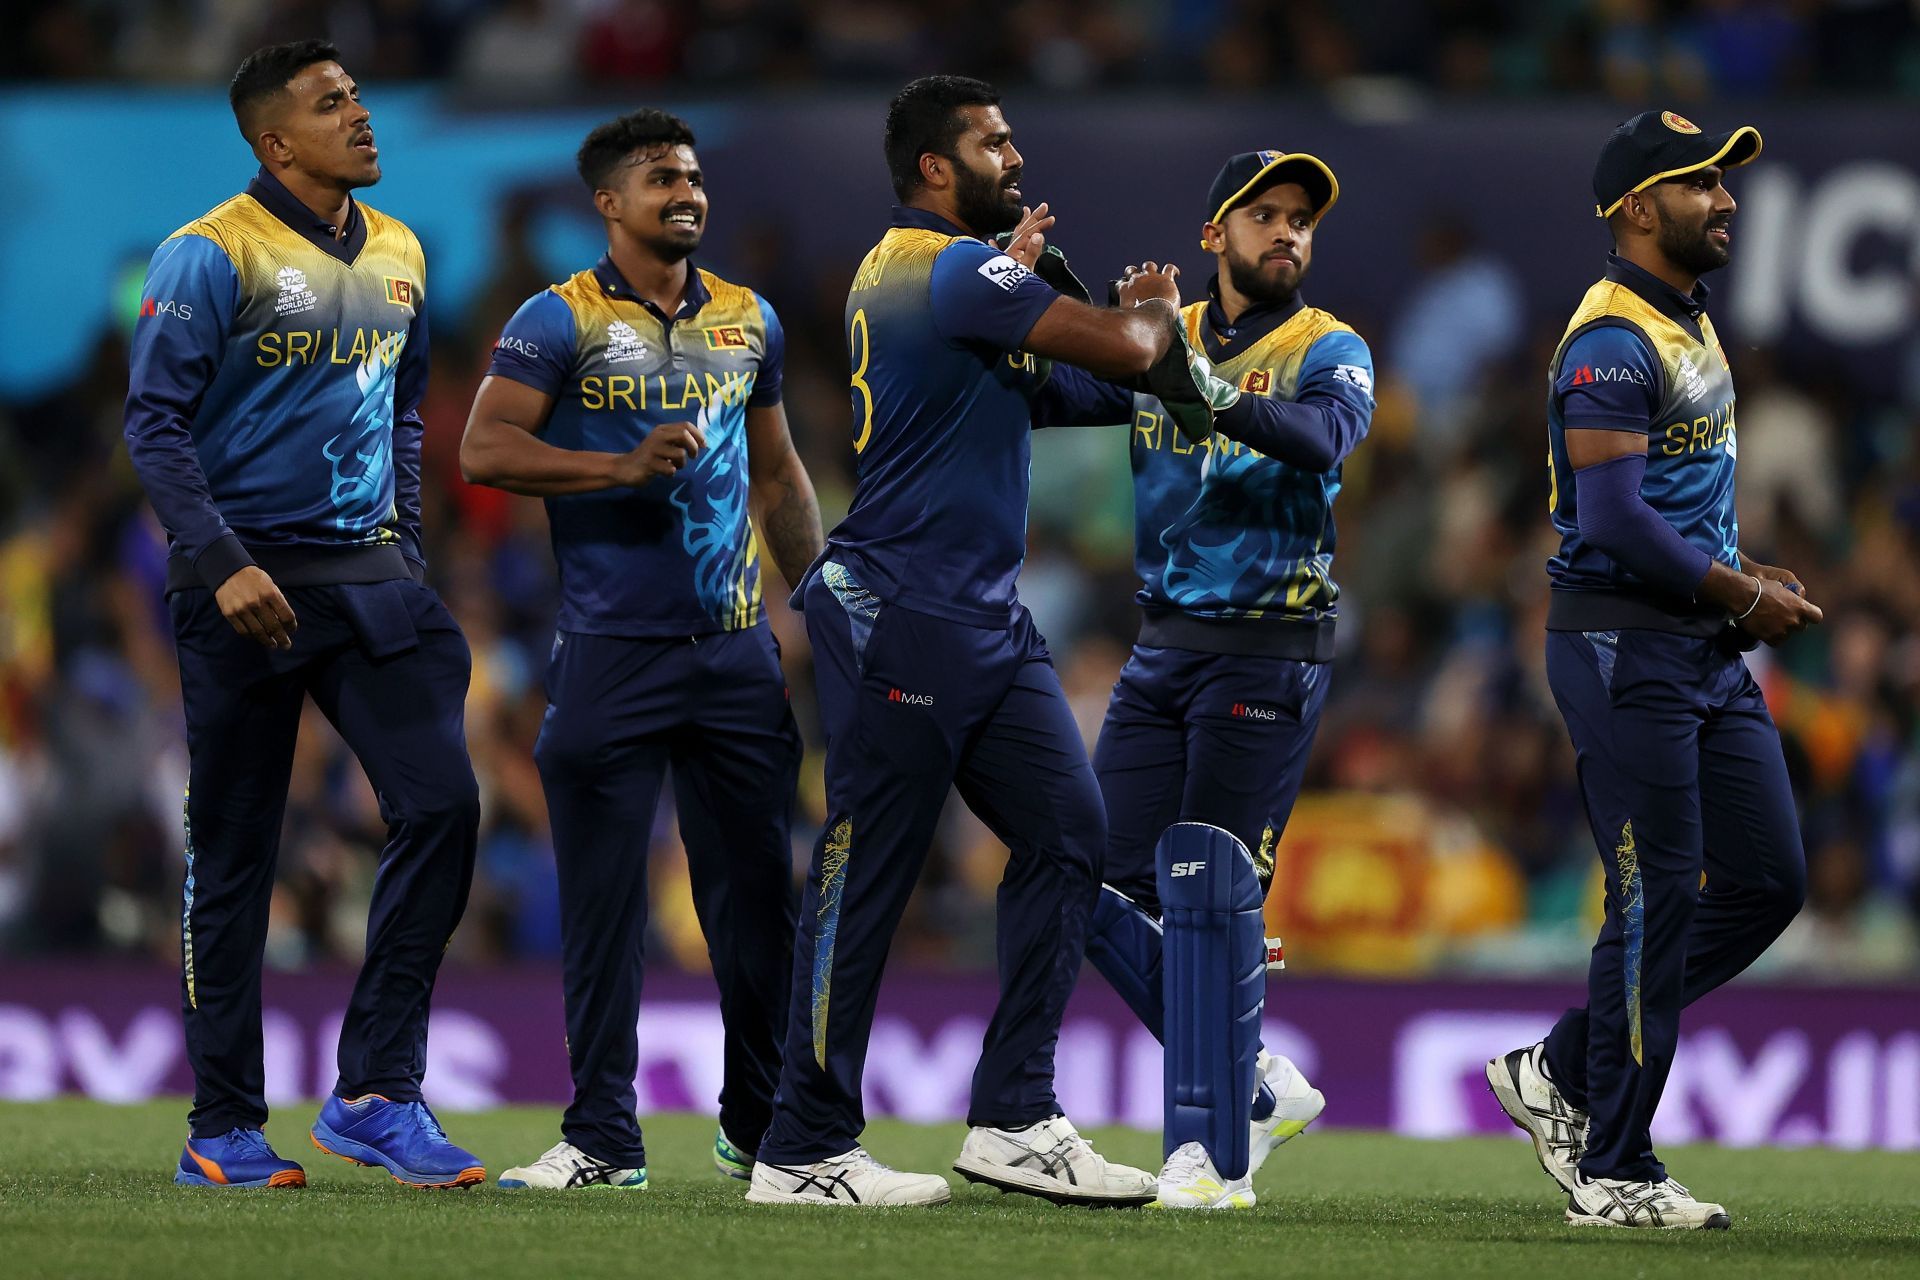 Sri Lanka will miss the services of some veteran players